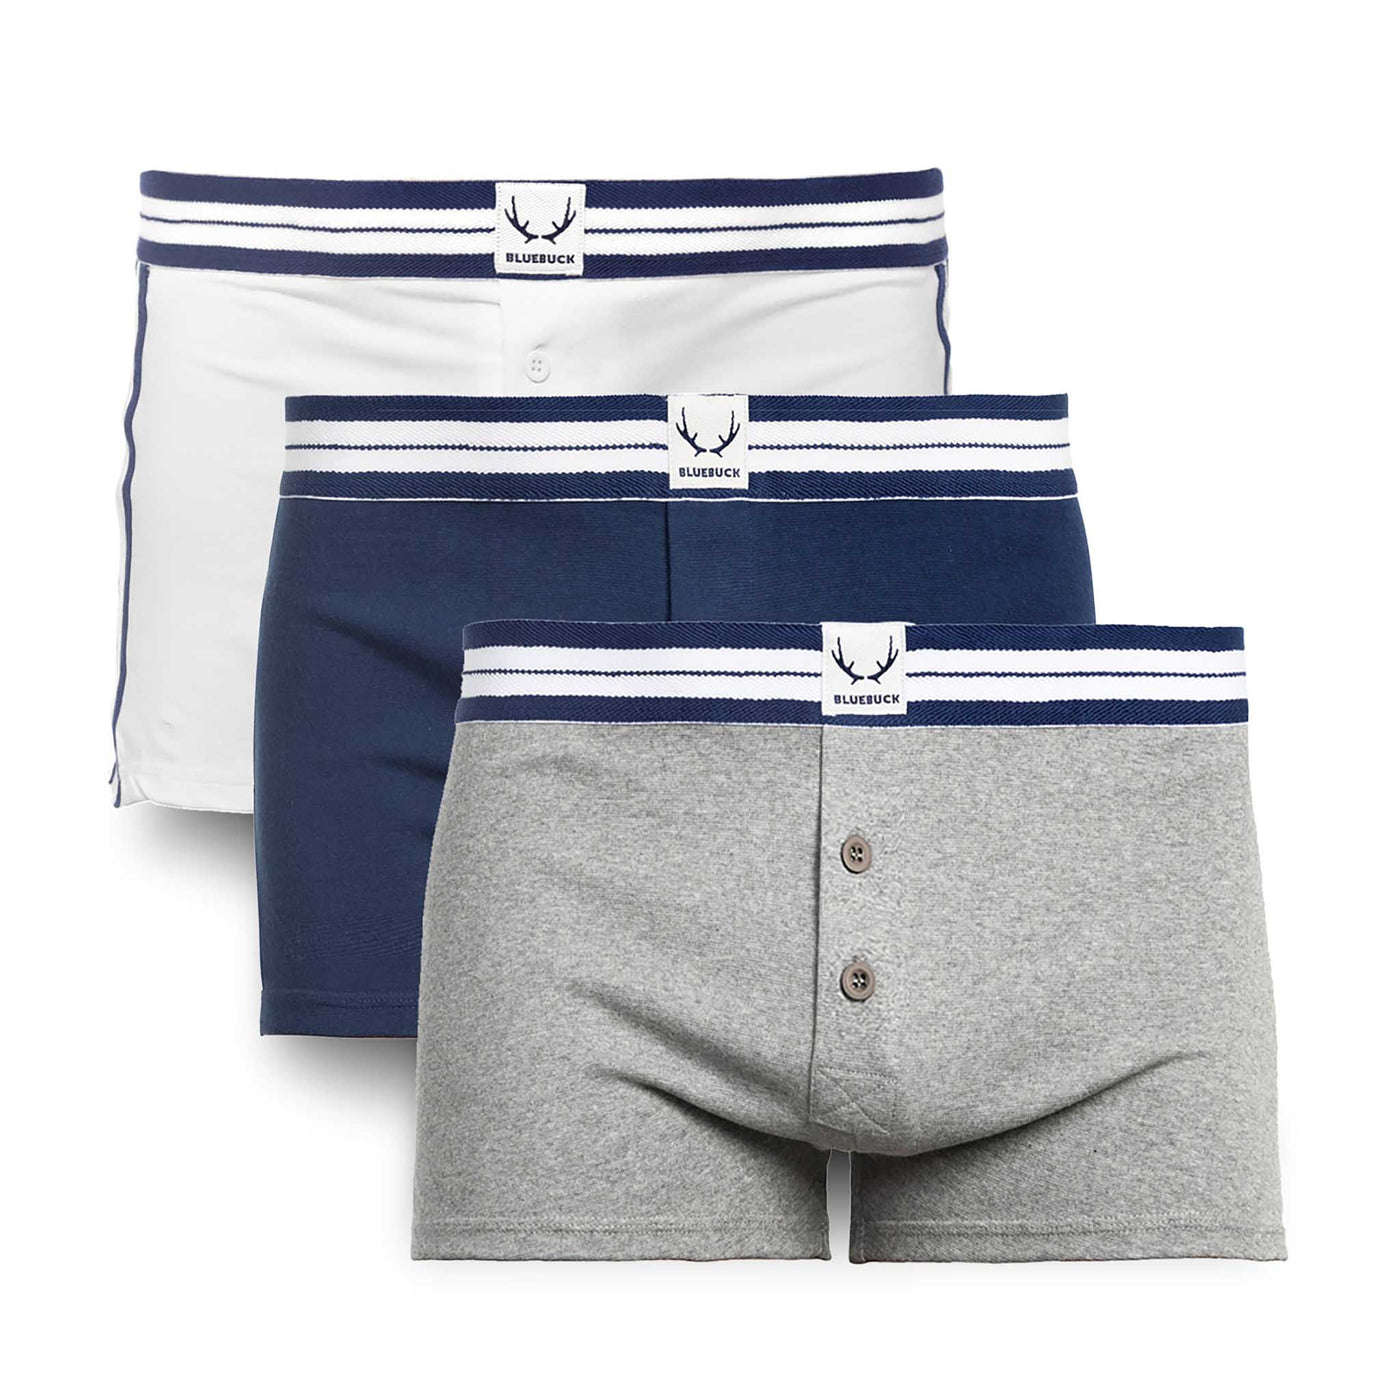 Pack of 3 organic cotton men's boxers